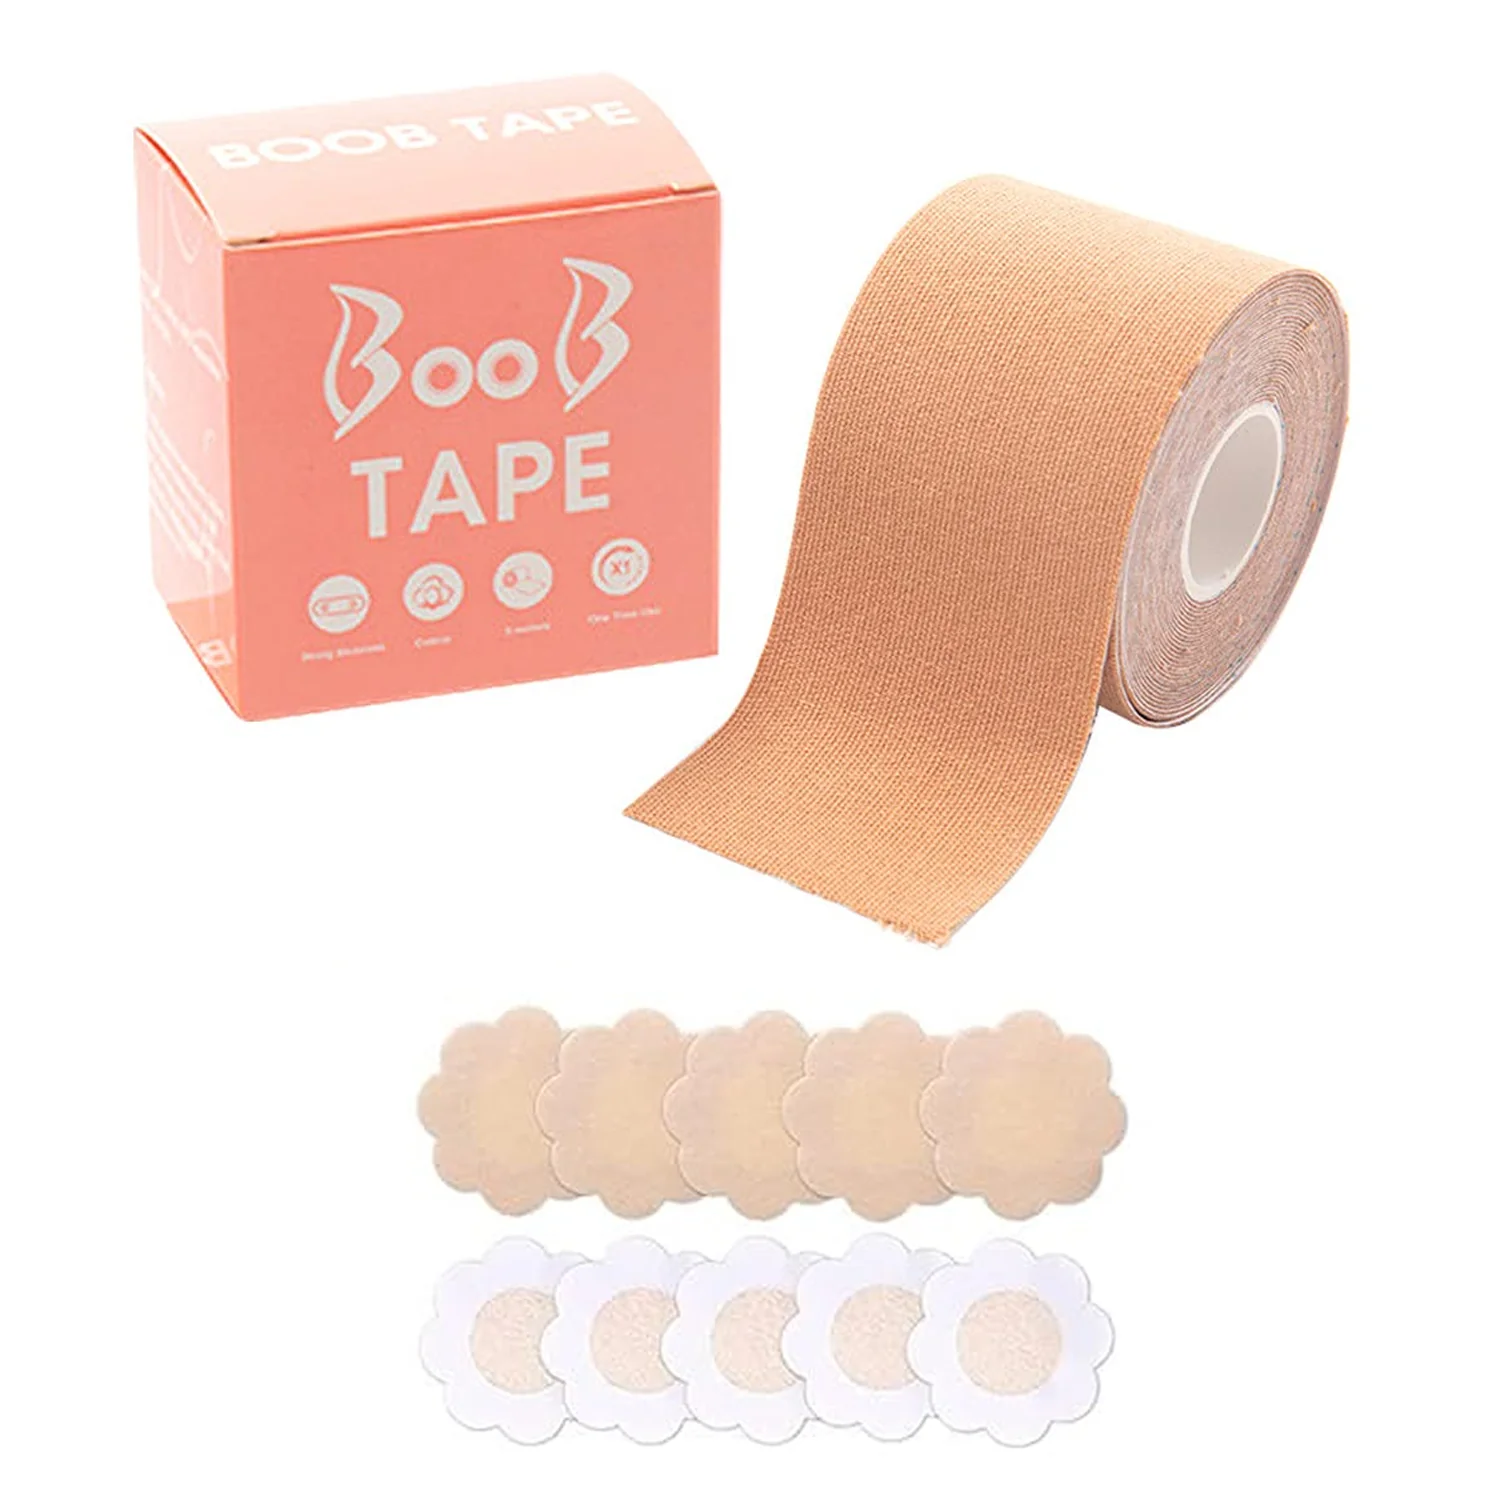 BOOB TAPE WITH 10 PAIRS NIPPLE COVER COTTON WIDE THIN BREAST TAPE - WOMEN'S  & GIRL'S BREAST